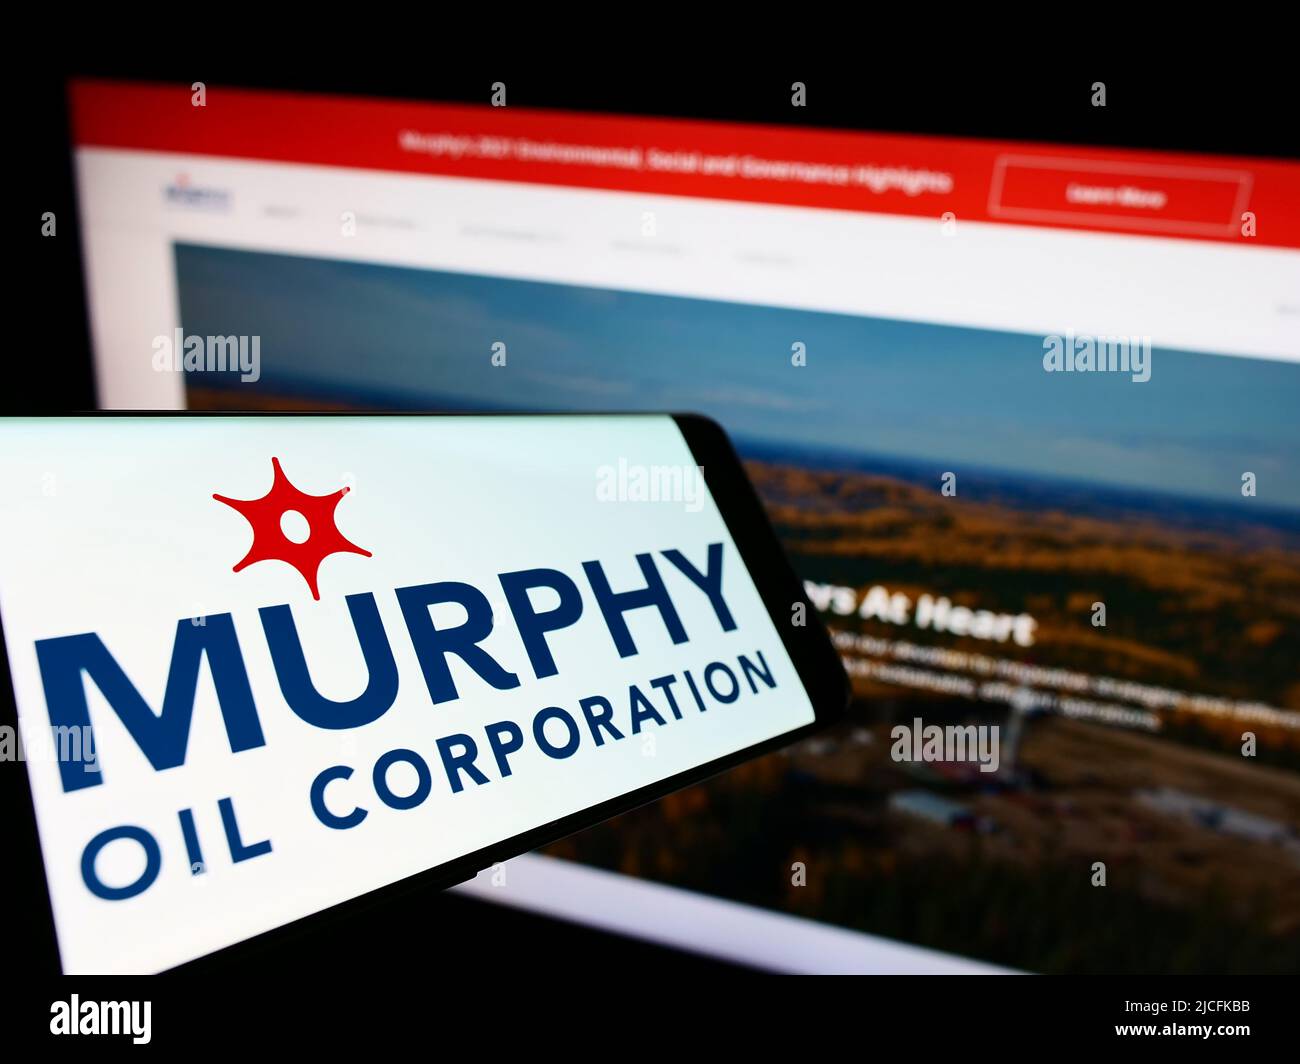 Smartphone with logo of US exploration company Murphy Oil Corporation on screen in front of business website. Focus on center of phone display. Stock Photo